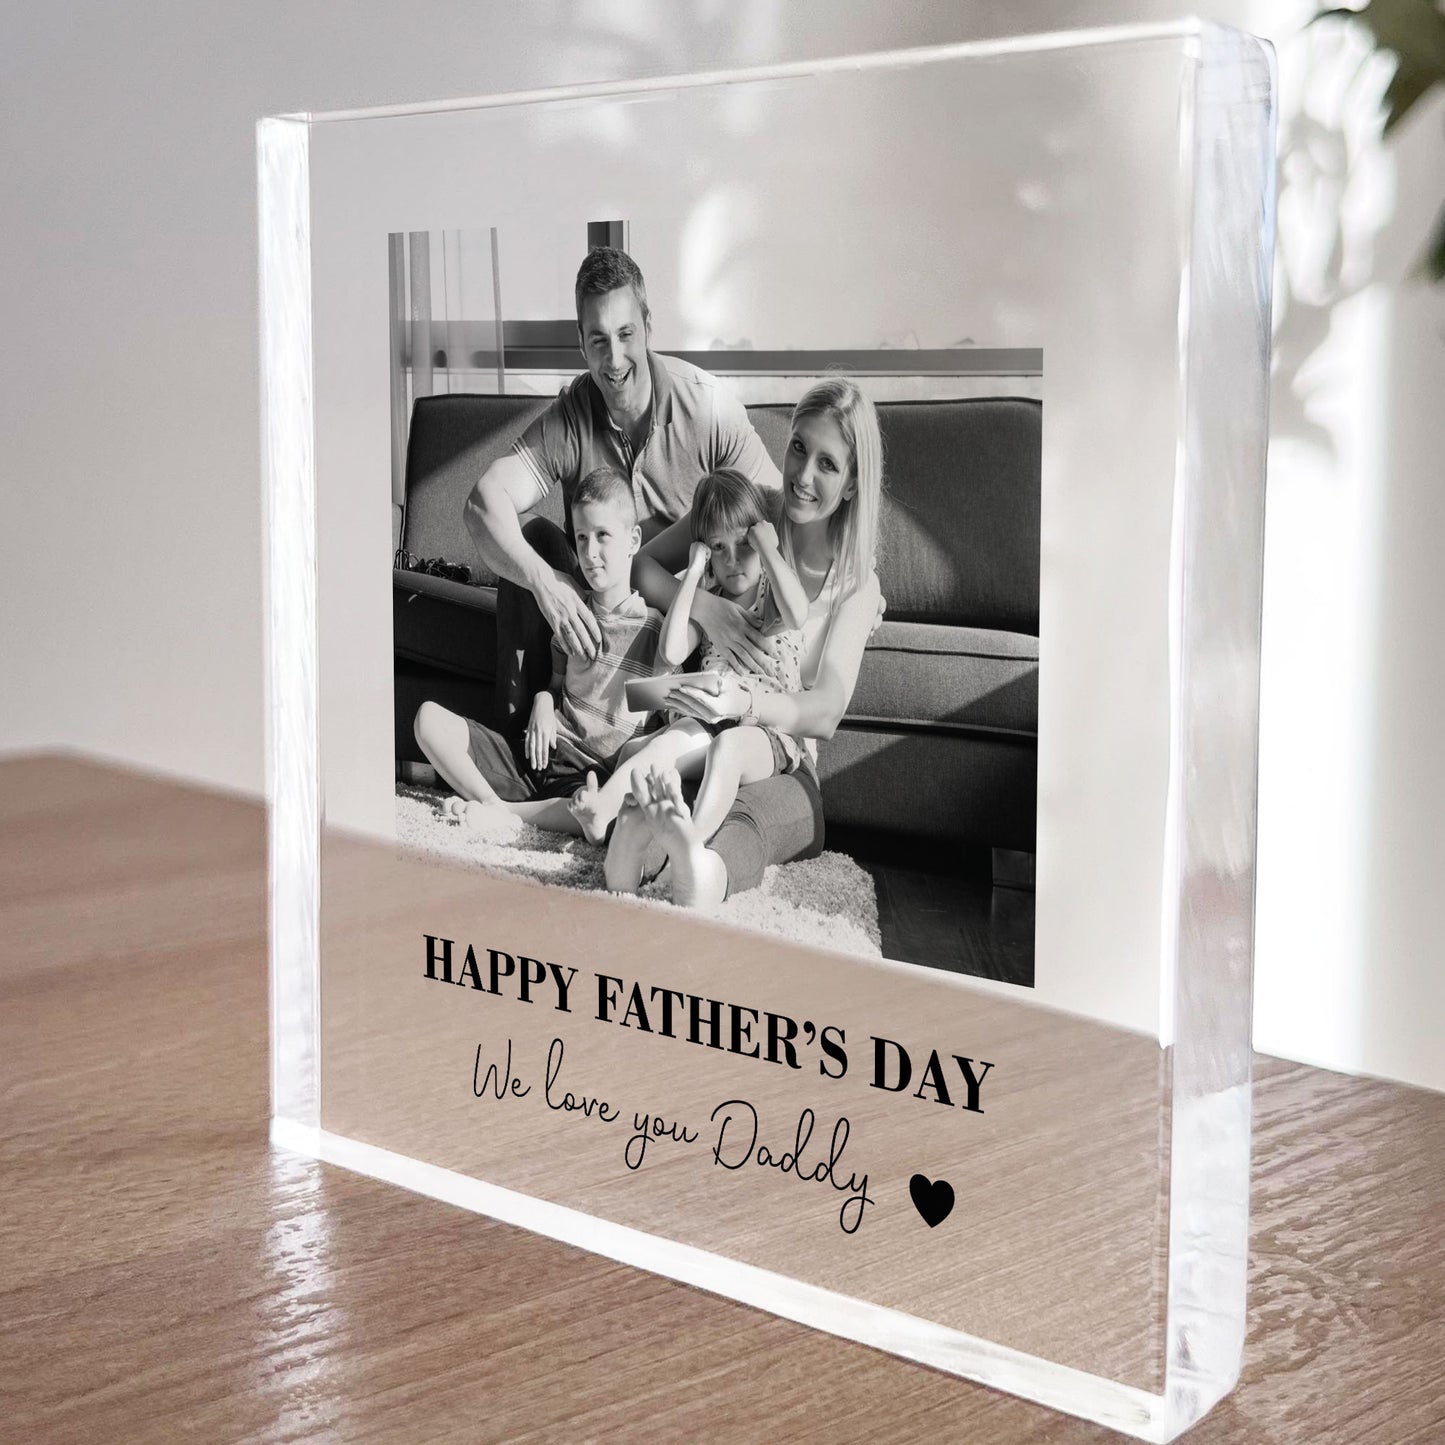 Fathers Day Gift From Daughter Son WE LOVE YOU DADDY Photo